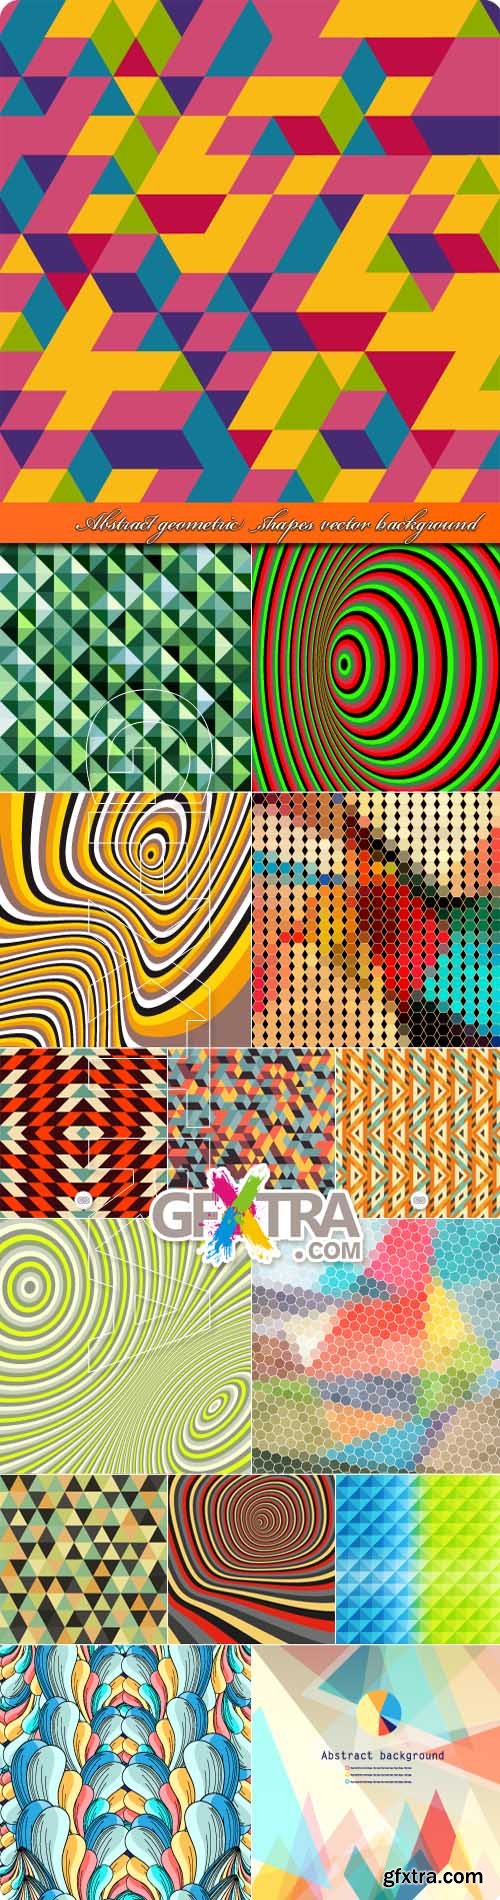 Abstract geometric shapes vector background